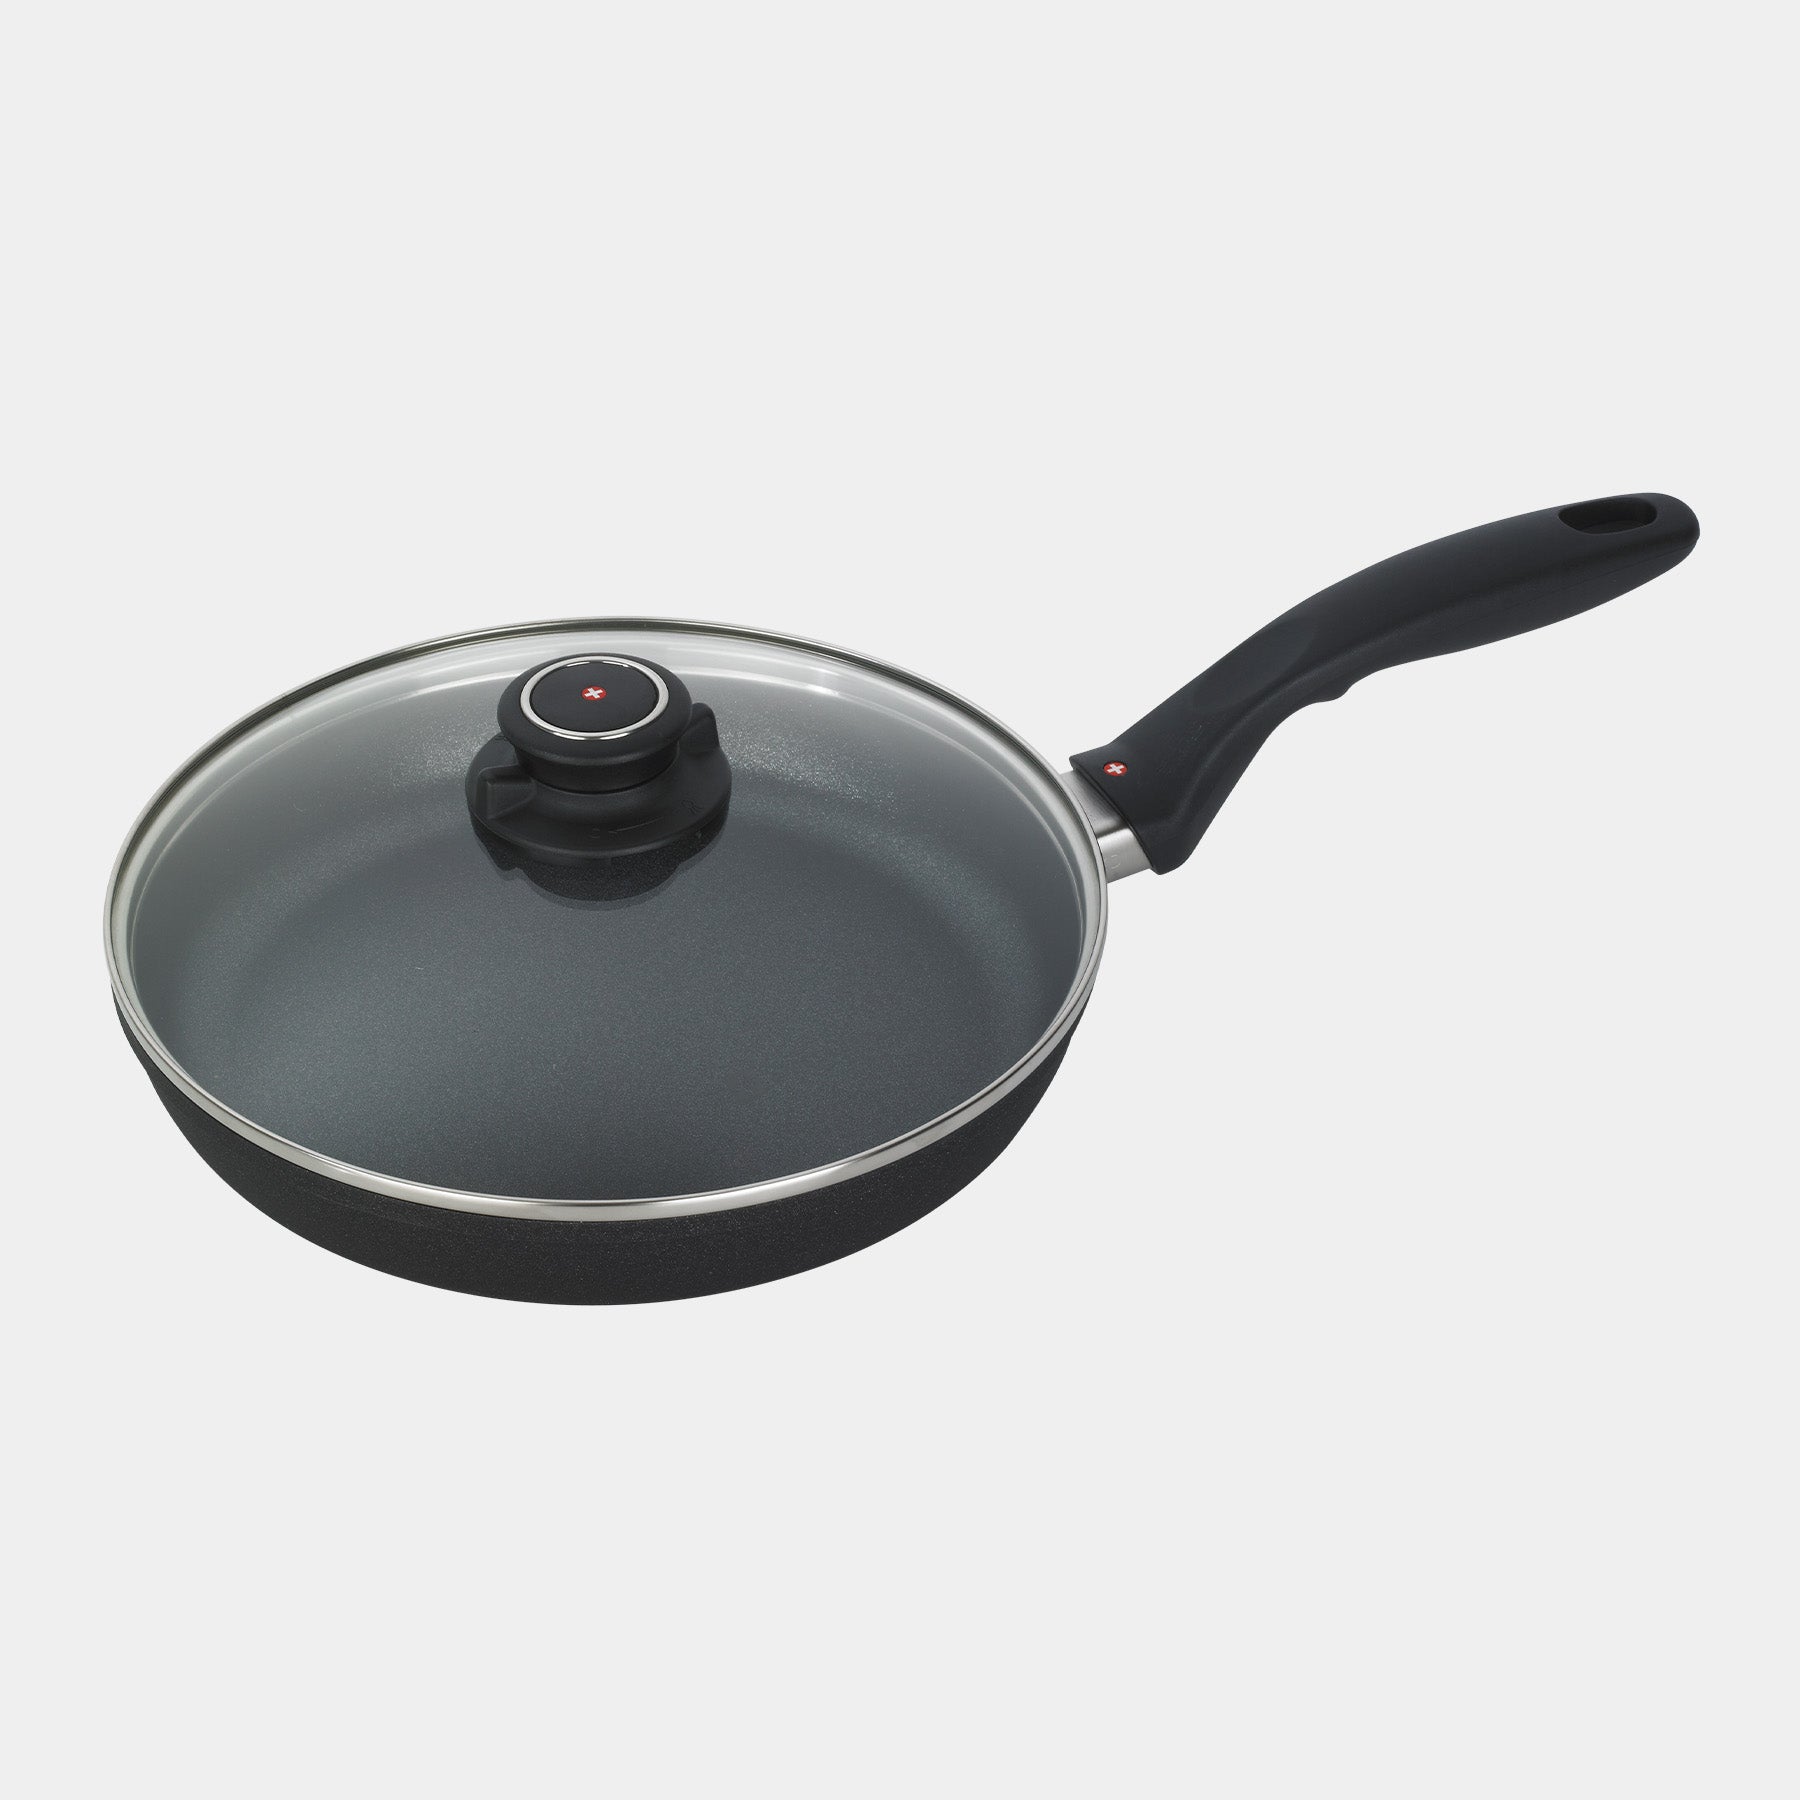 XD Nonstick 9.5" Fry Pan with glass lid